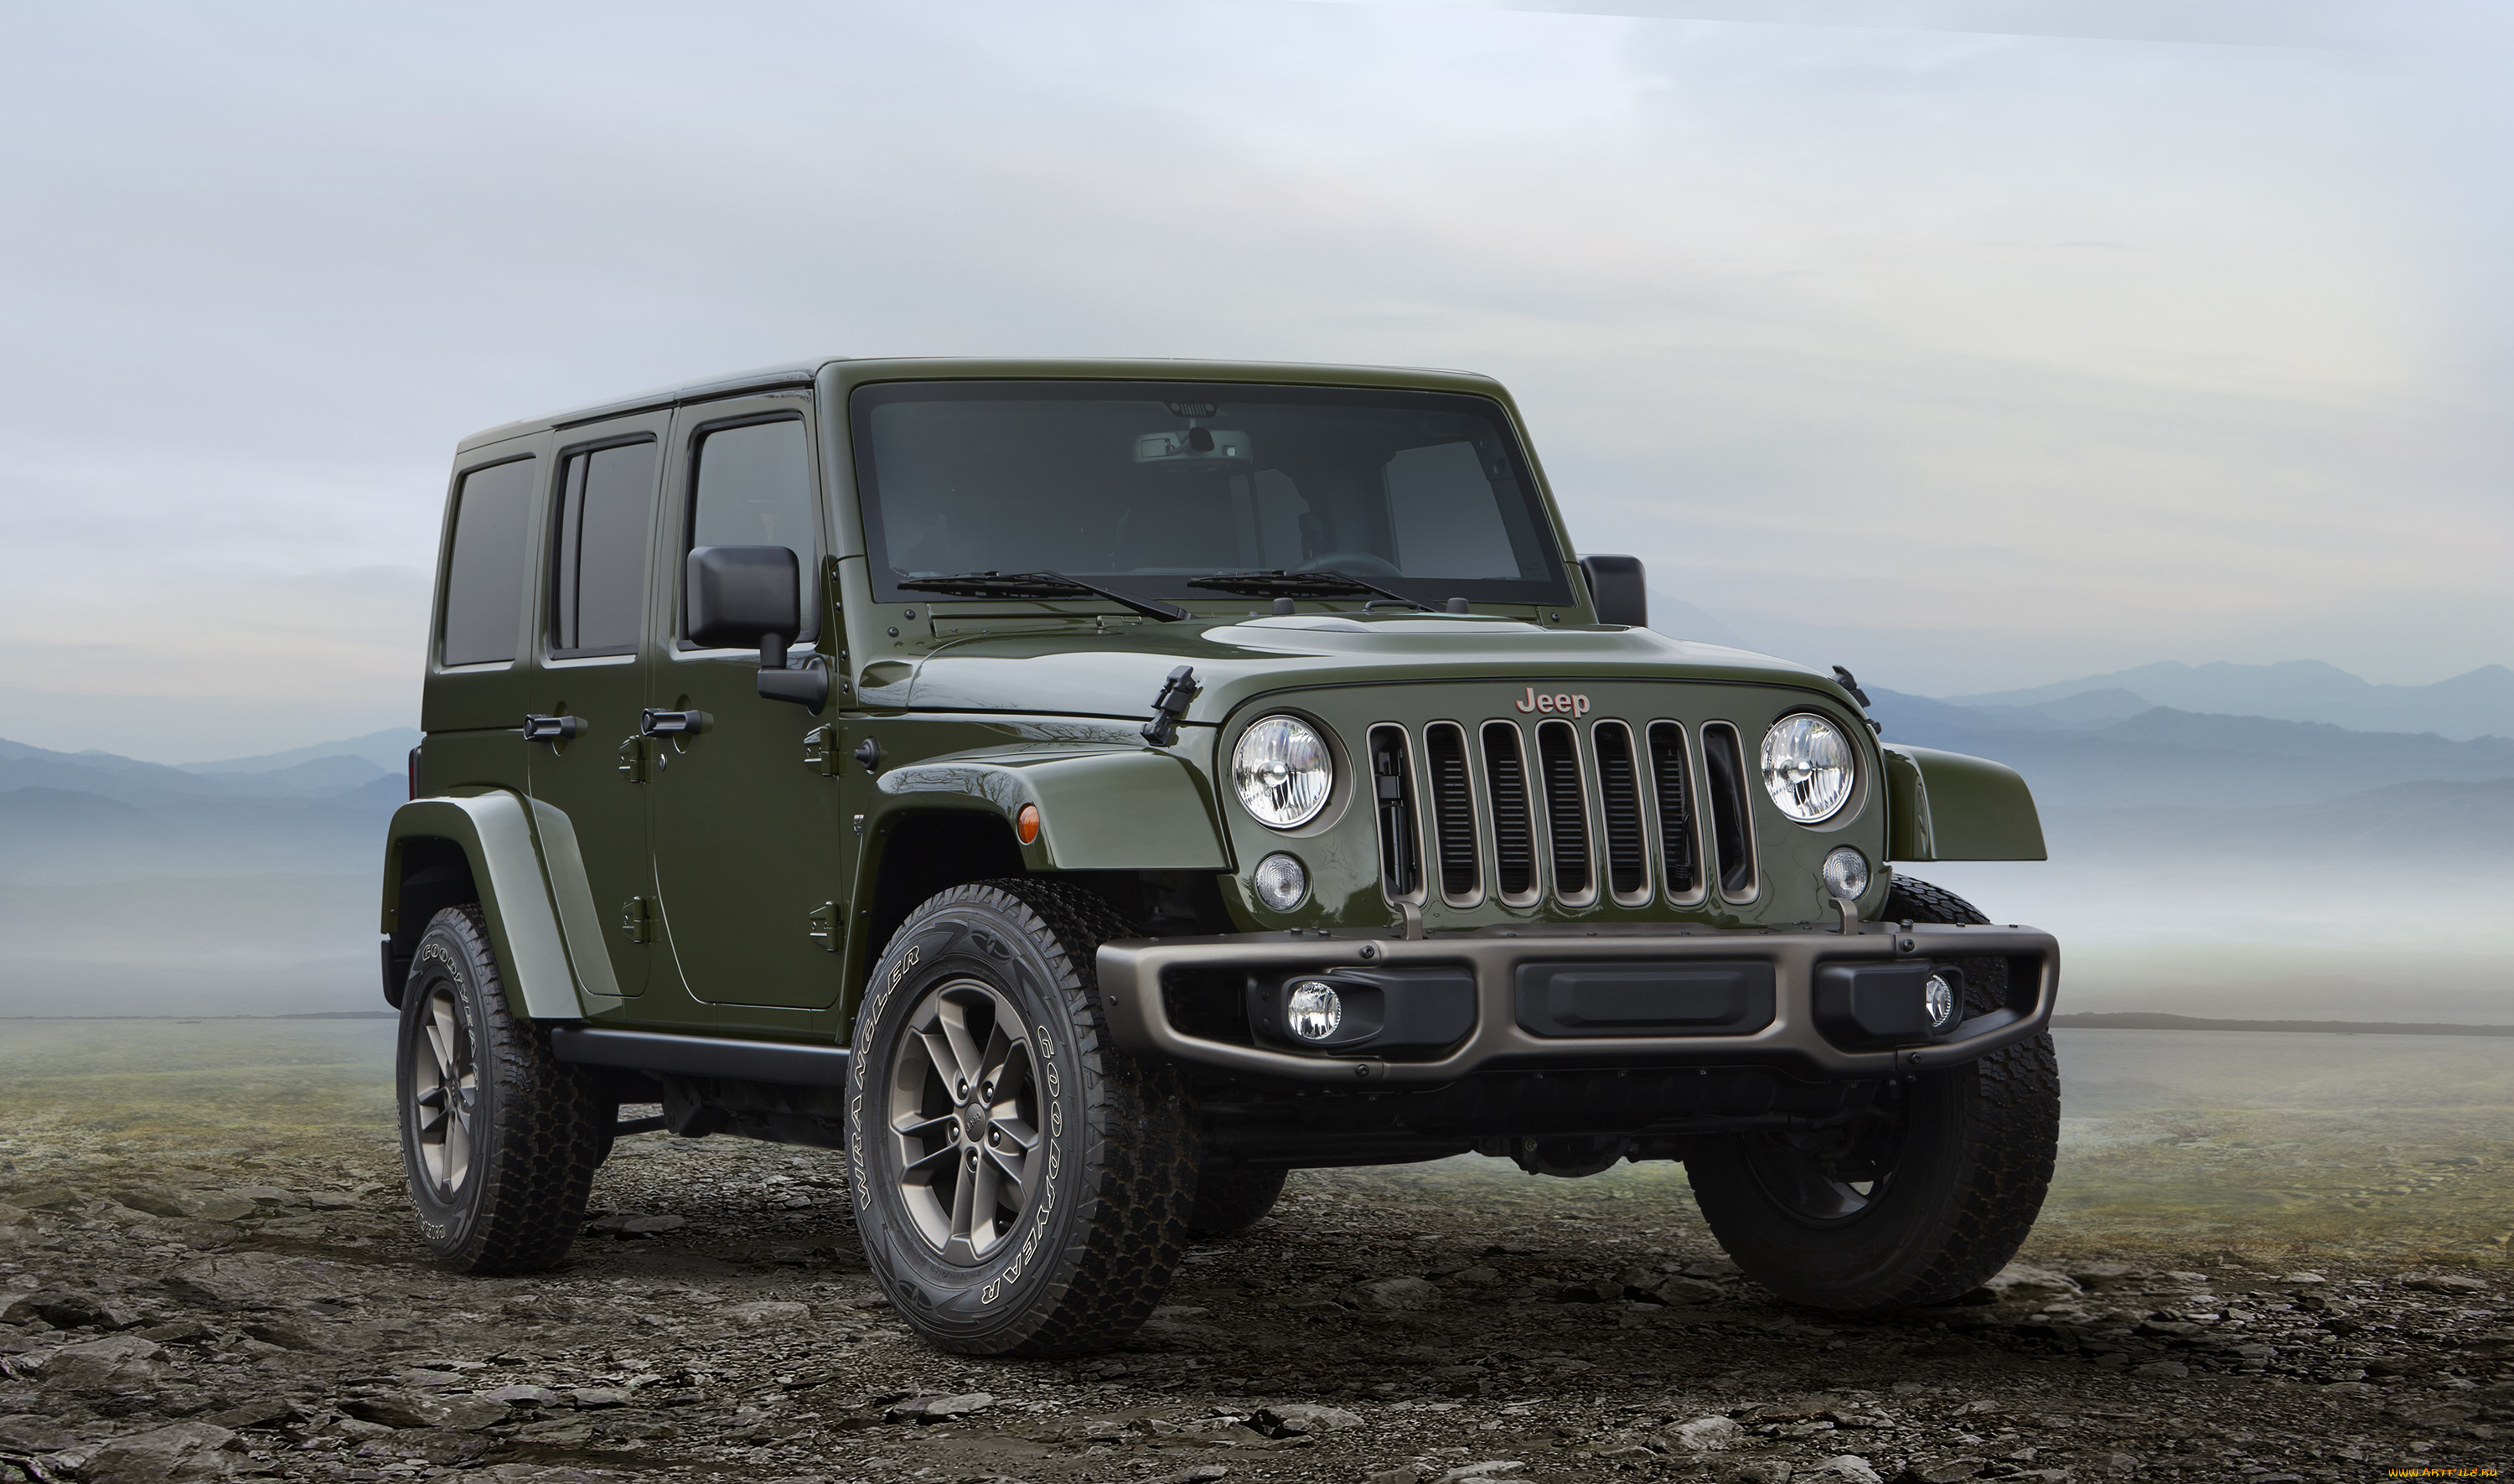 jeep wrangler unlimited 75th anniversary edition 2016, , jeep, edition, anniversary, 75th, unlimited, wrangler, 2016